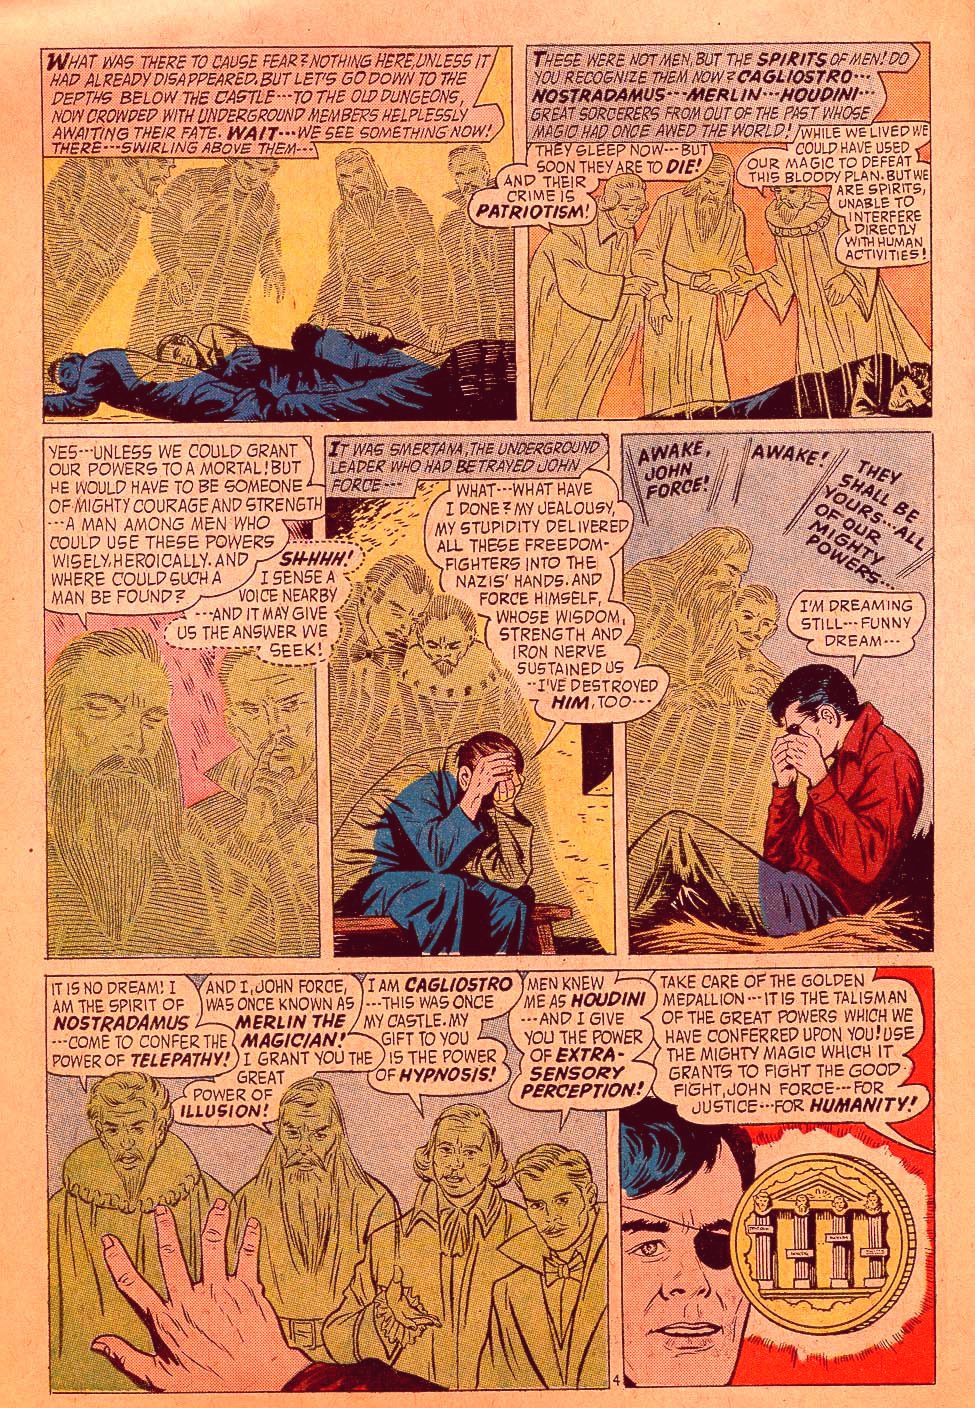 Magic Golden Age Heroes - Page 6 Magic_24